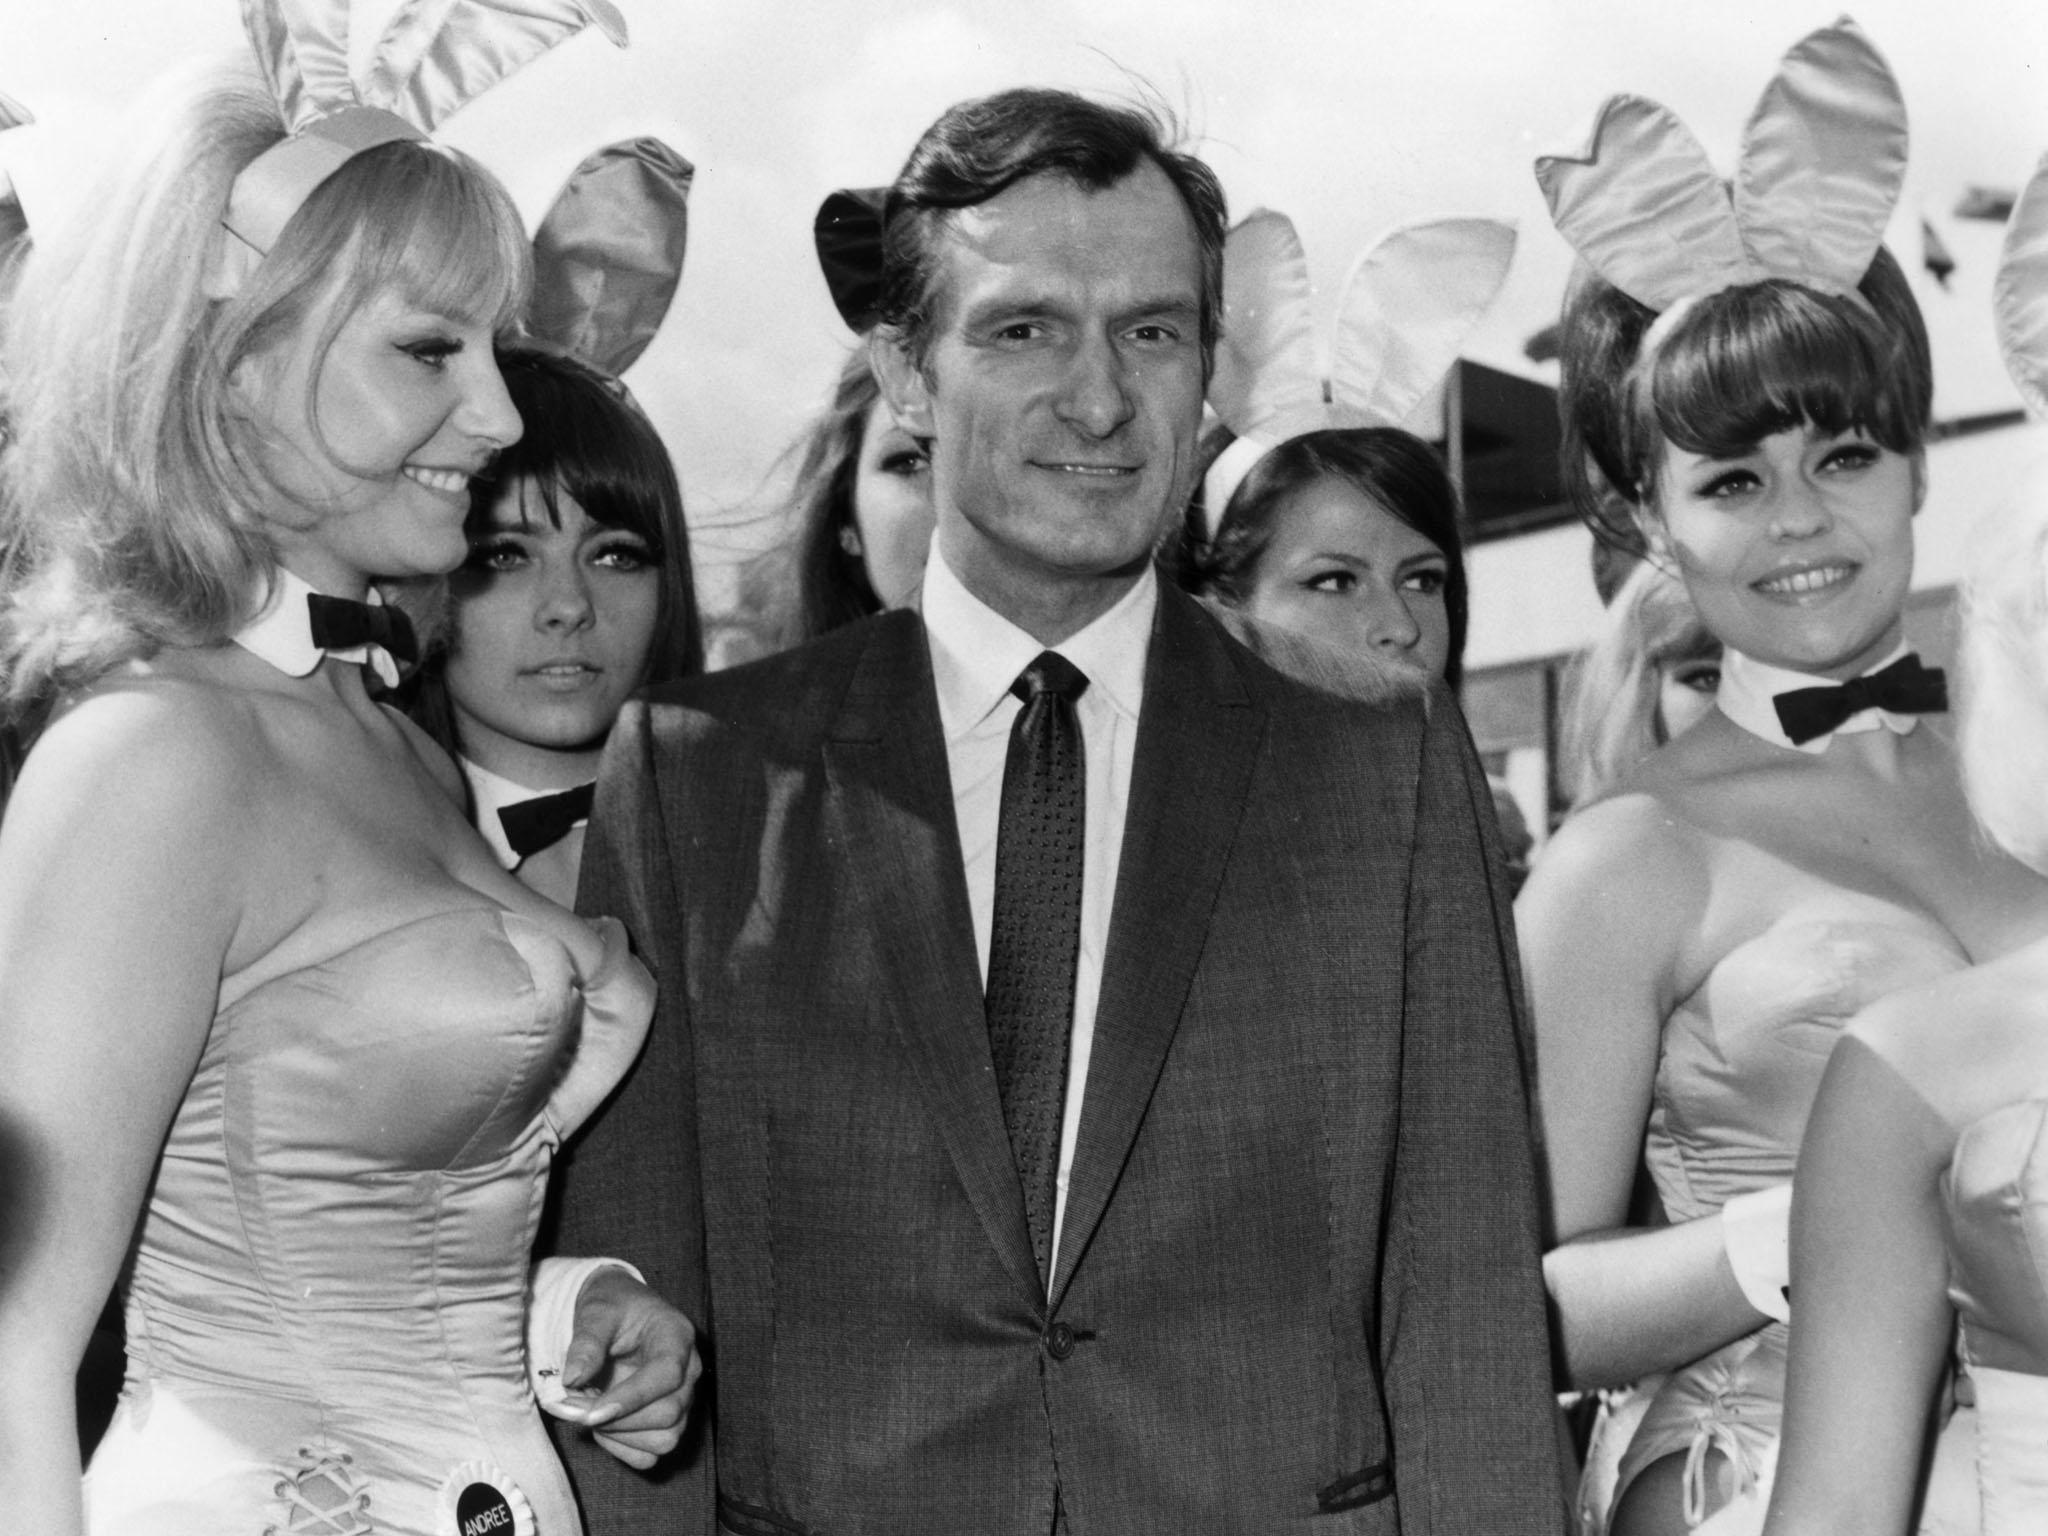 The Playboy editor and tycoon published some of the most groundbreaking articles of his time